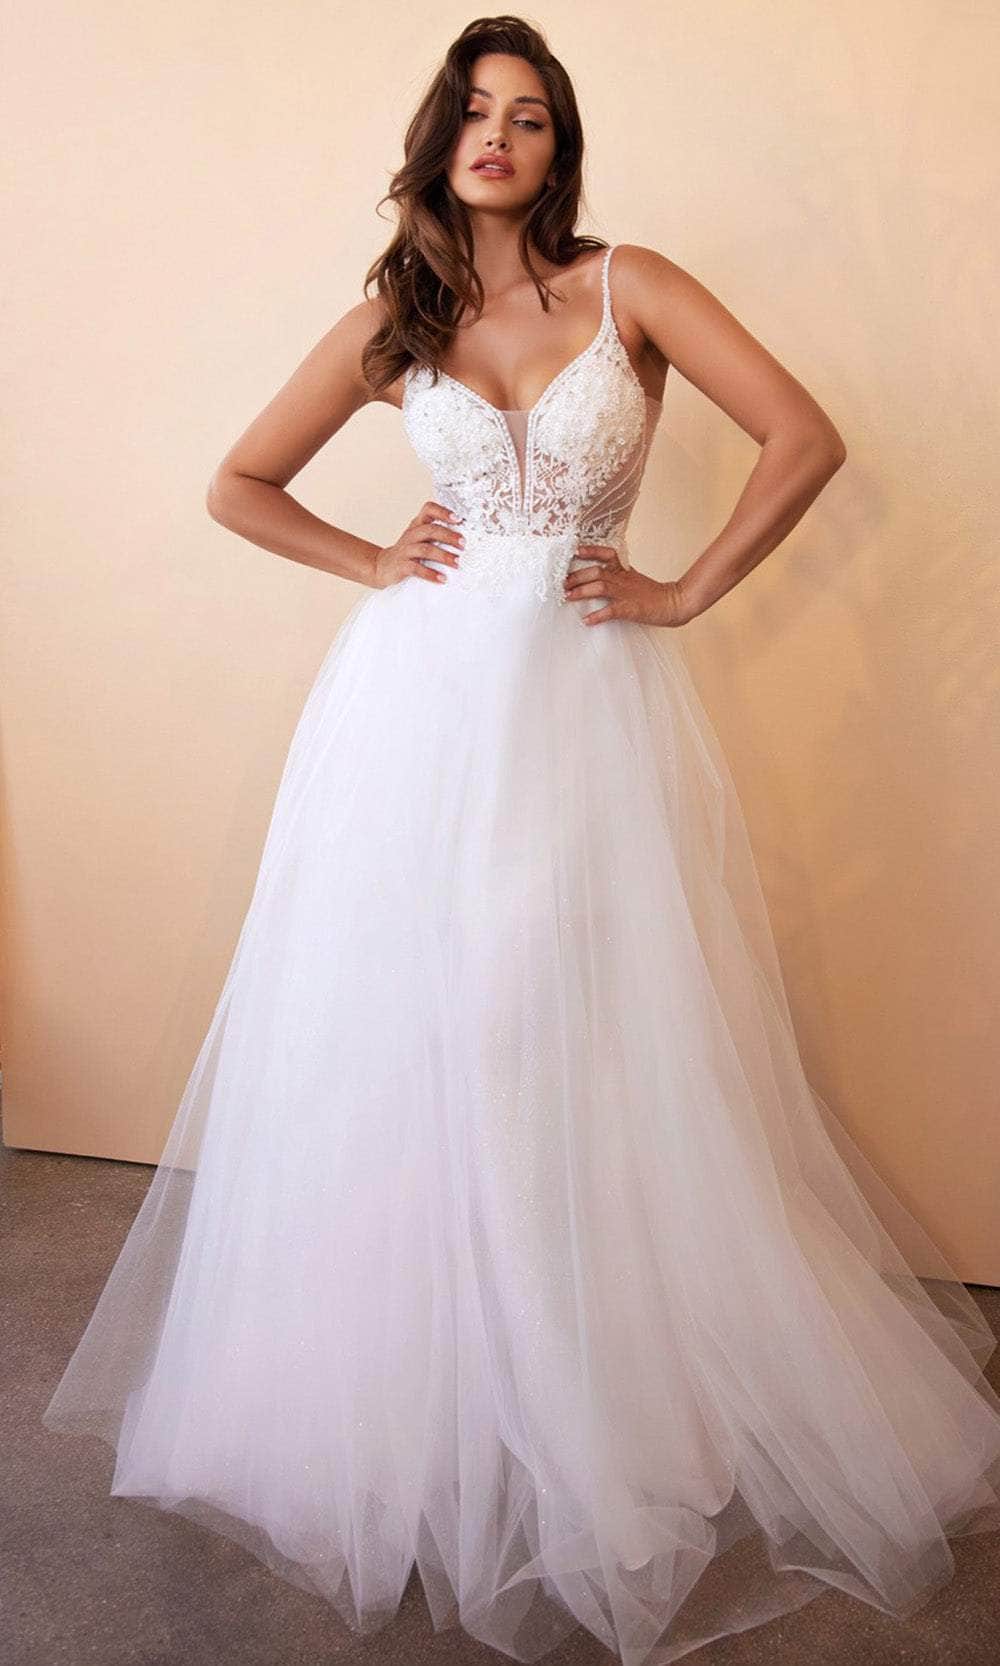 Cinderella Divine CD0195W - Floral Lace Tulle Wedding Gown
